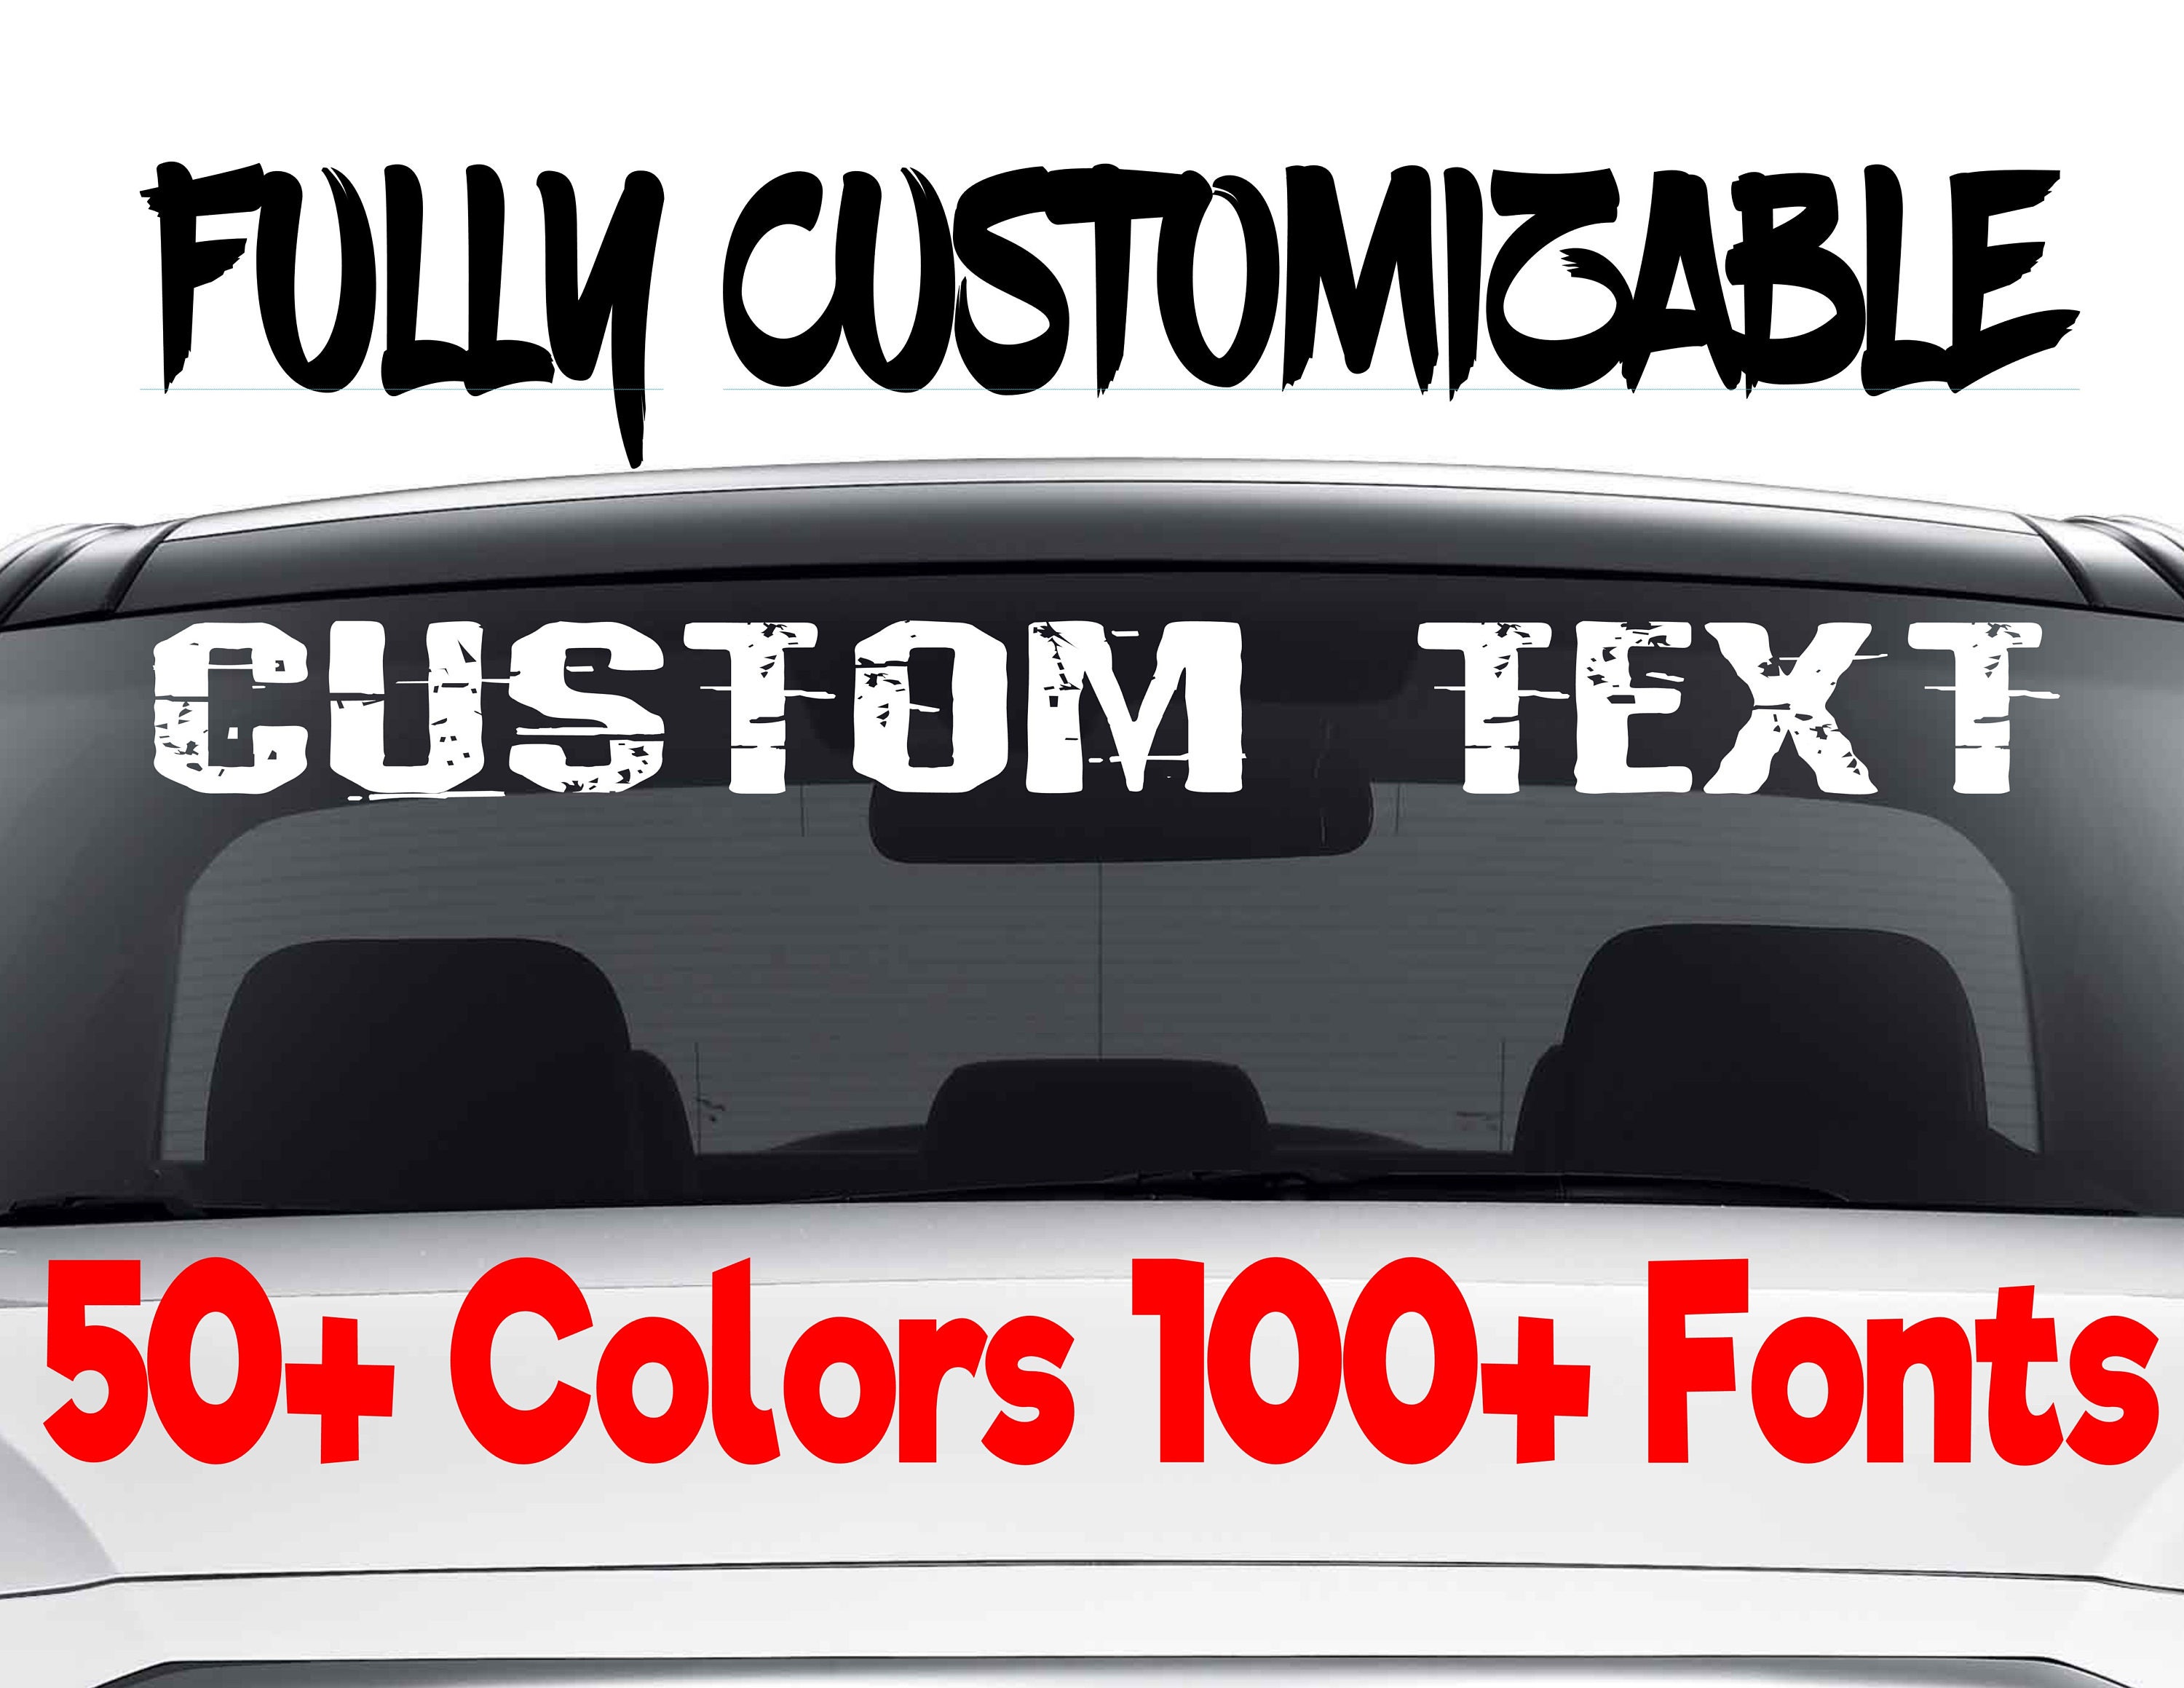 Outdoors JDM Decal for Car Windows TRUMP BUILD THE WALL Decal Computer etc 